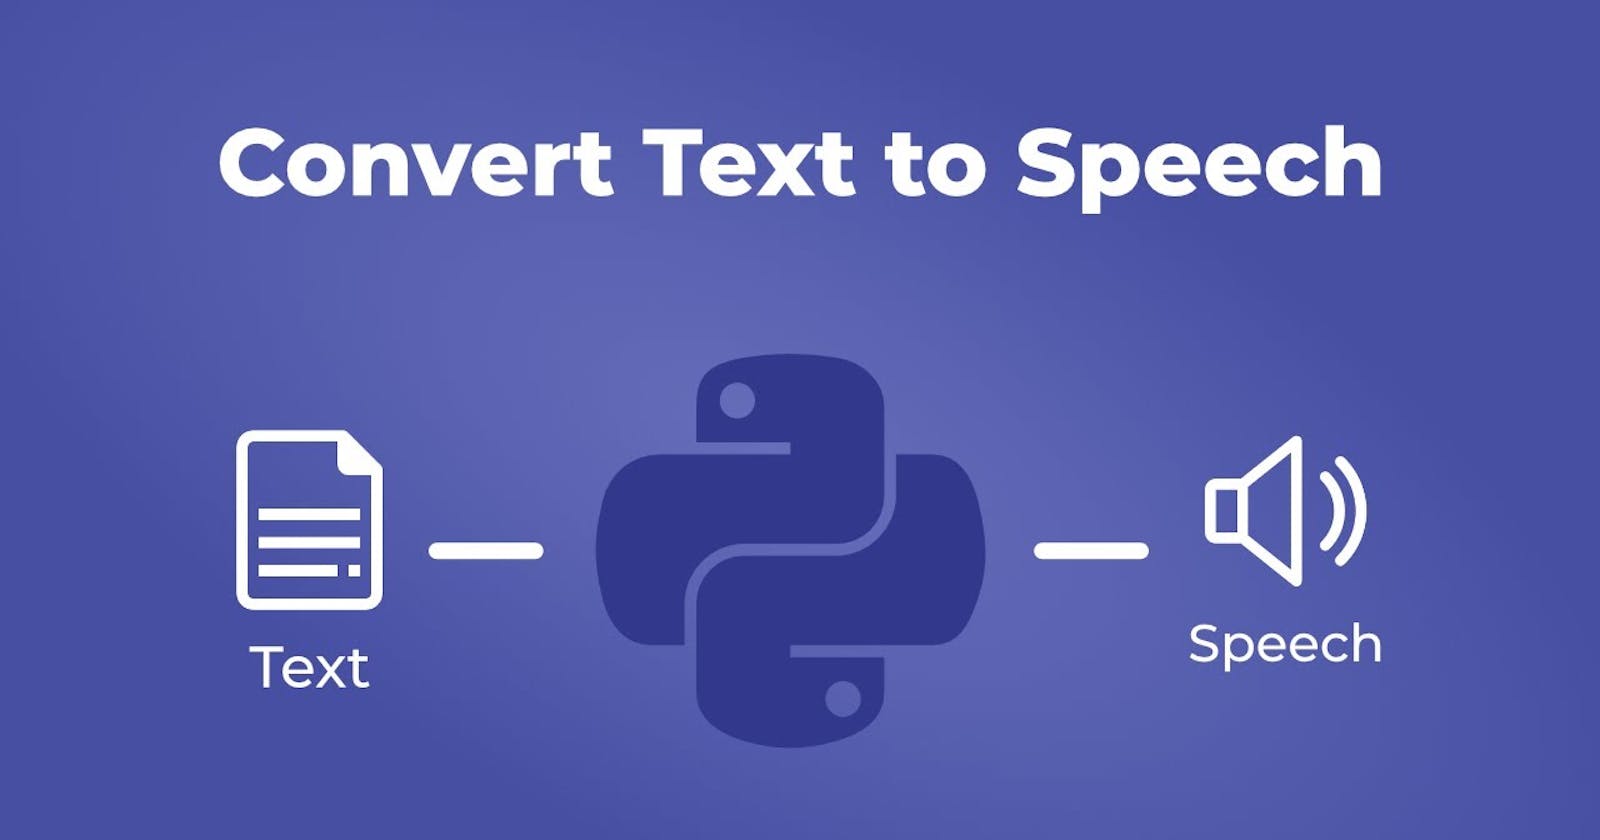 Converting Text to Audio with Python: A Step-by-Step Guide